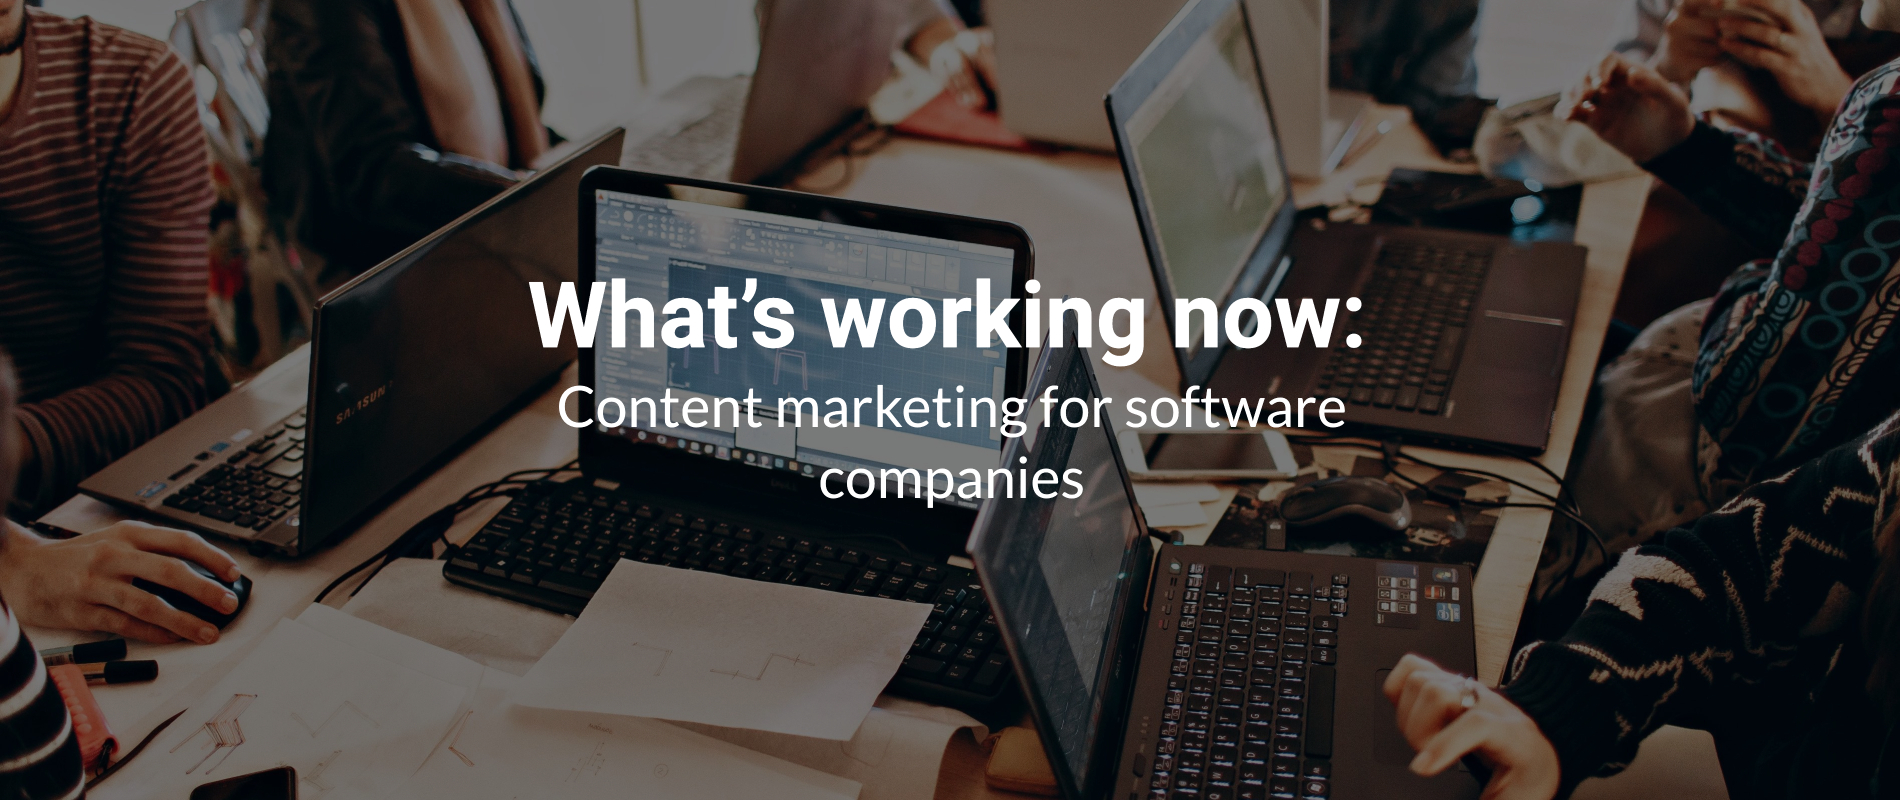 The most effective content marketing tactics software companies are leveraging today to tell their story, connect with customers and bring in more sales.